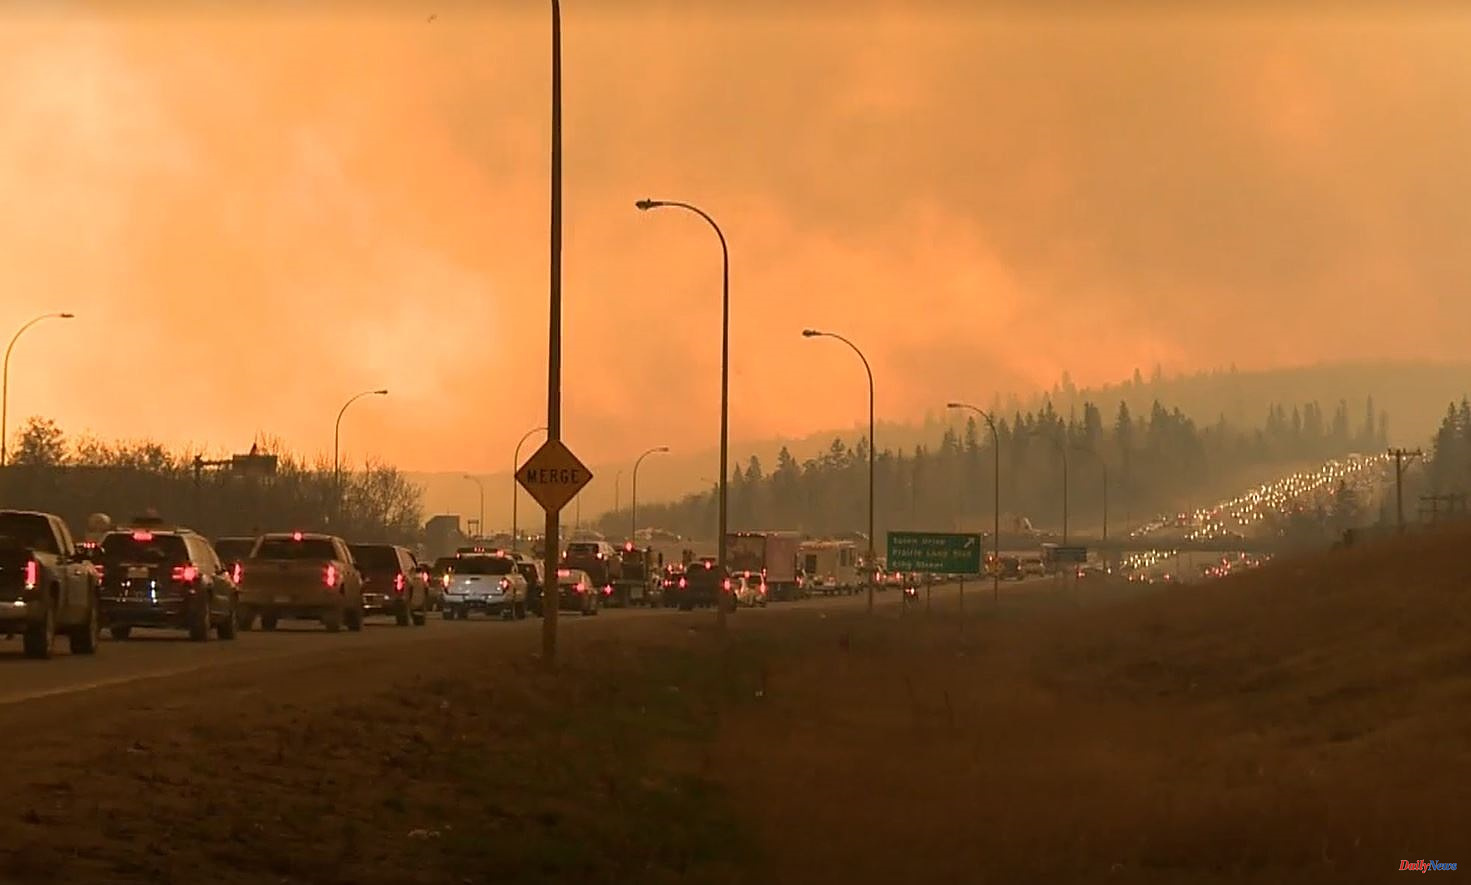 More than 100 fires Evacuated 25,000 people due to uncontrolled forest fires in Canada